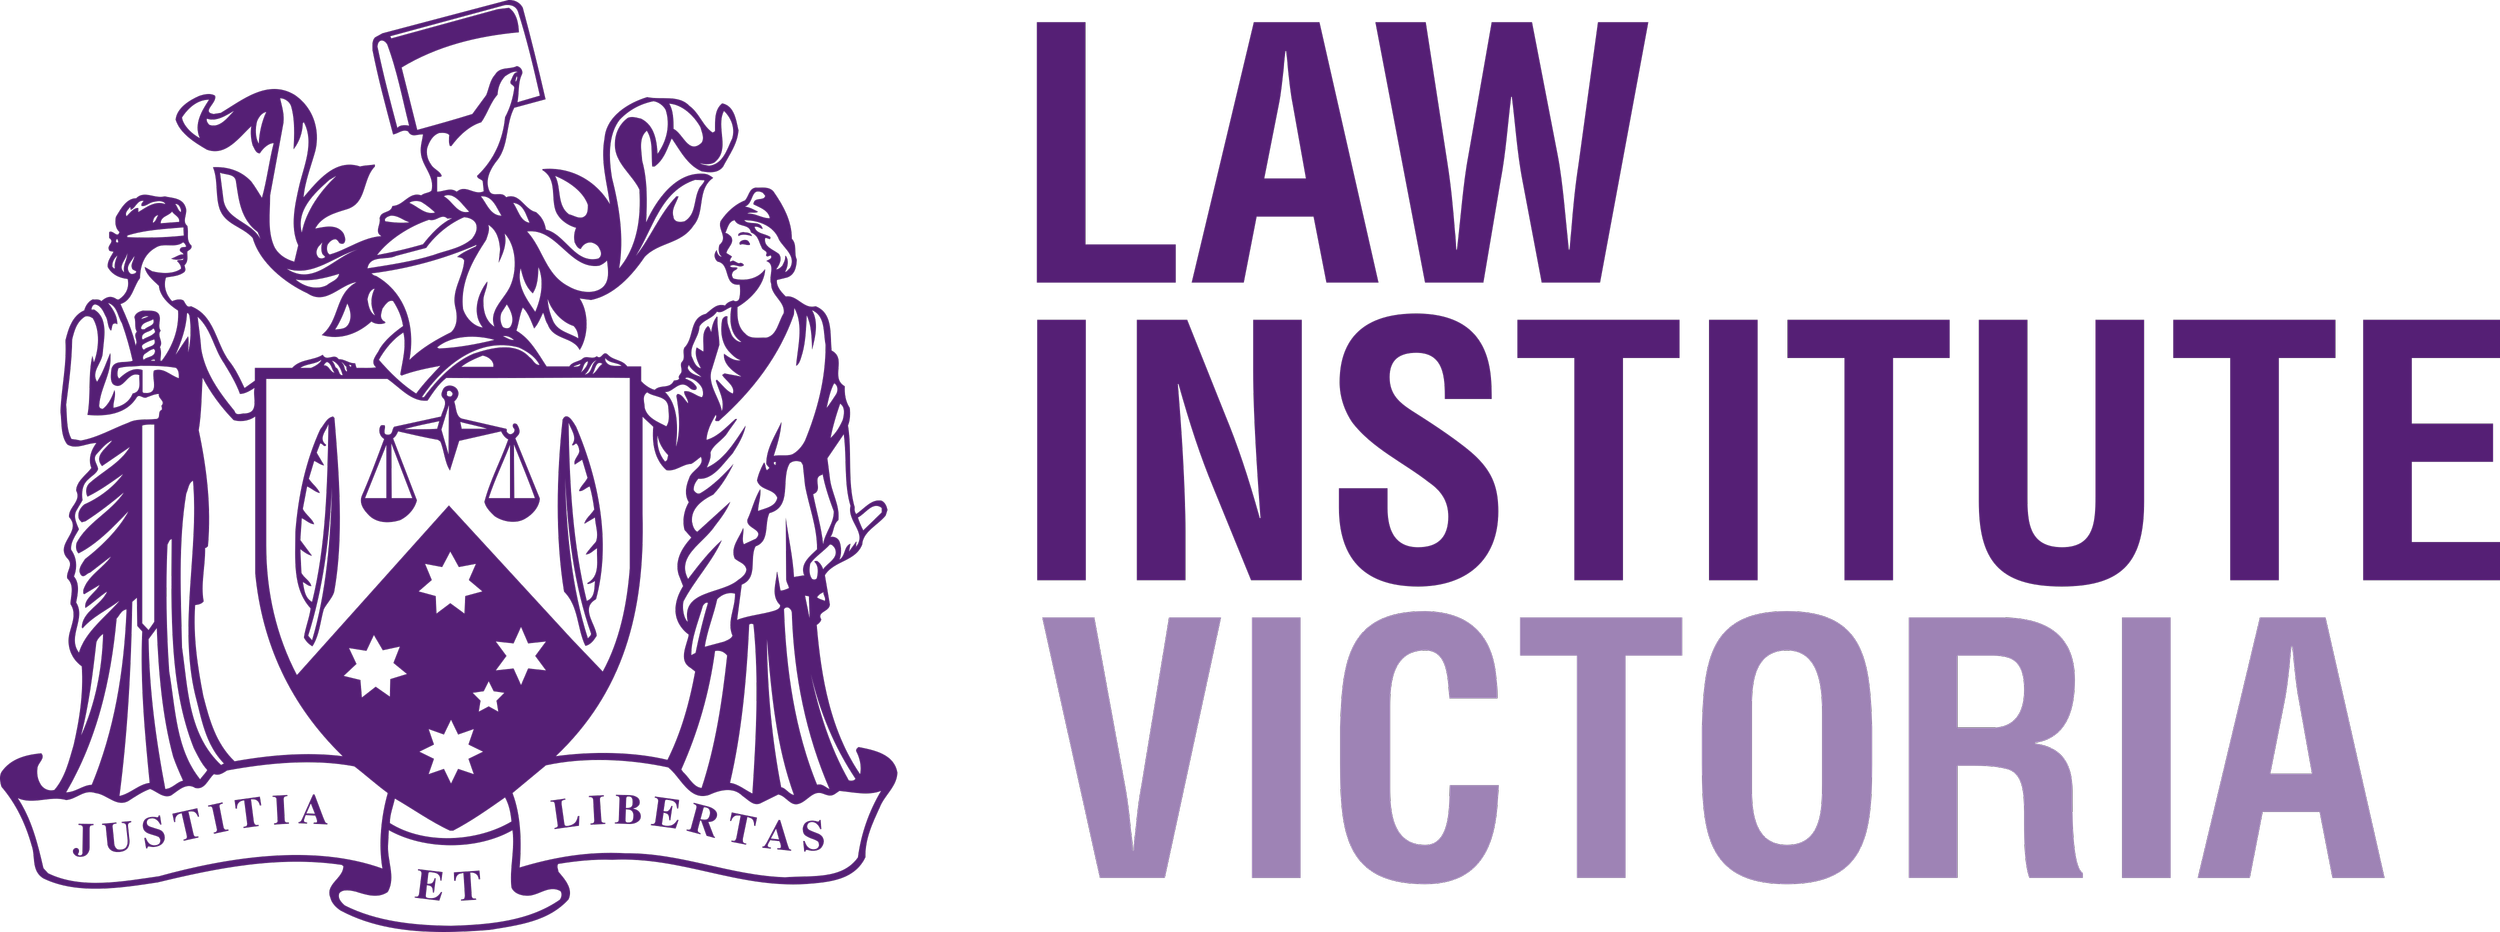 Law_Institute_of_Victoria_Logo_BTLawyers_Consultants.png